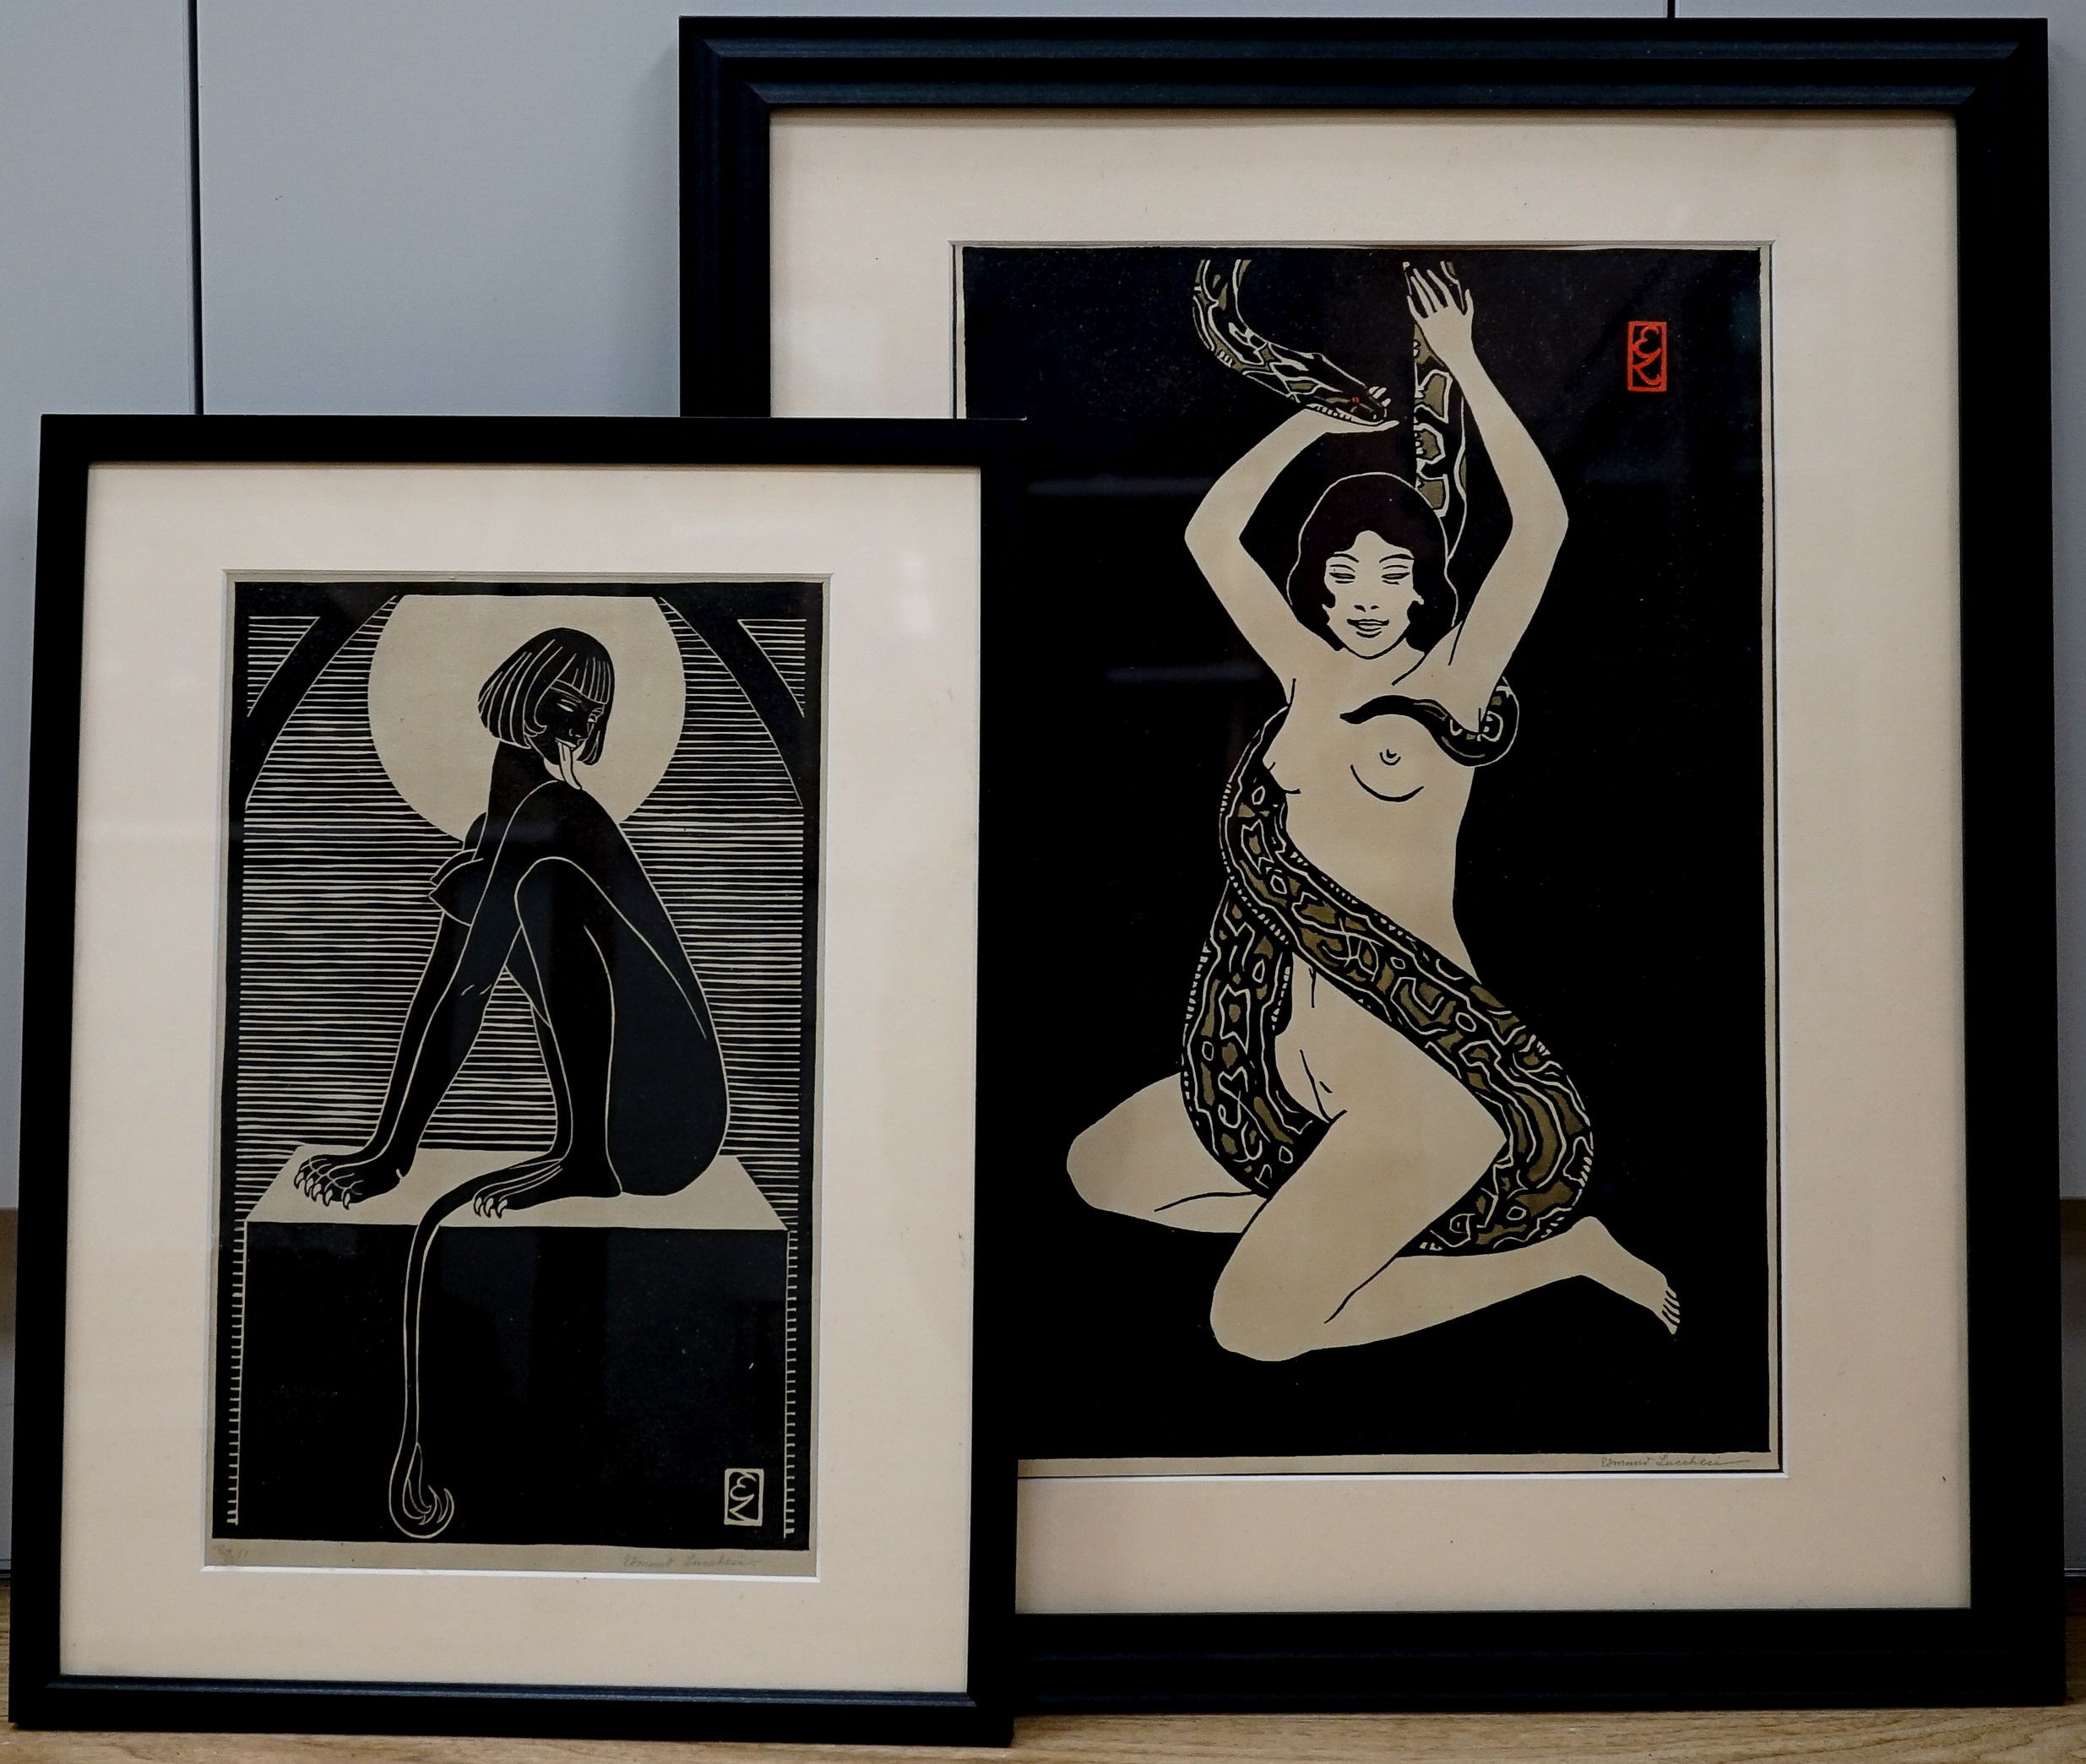 Edmund Lucchesi (1871-1964), two wood engravings, Snake Dancer and Sphynx, signed in pencil and numbered 18/1 and 7/1, 40 x 27cm and 32 x 20cm